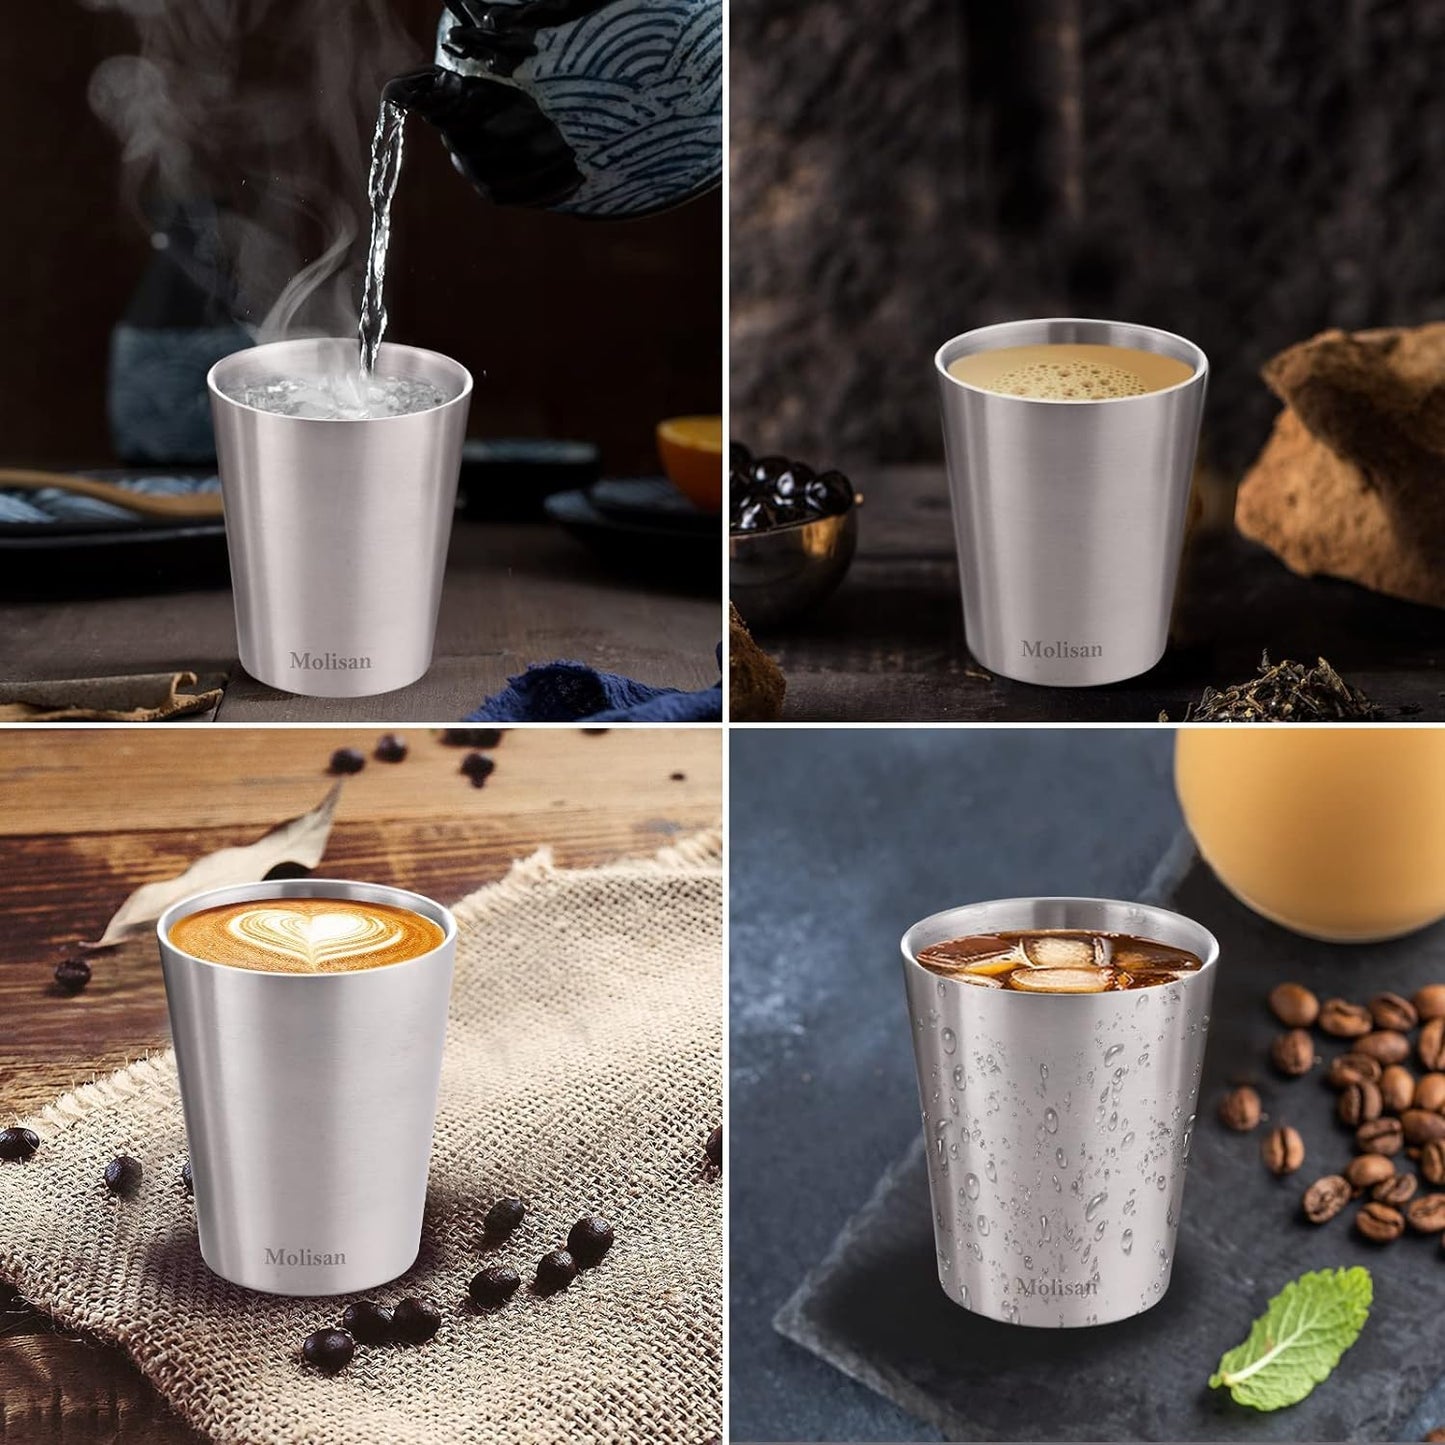 Stainless Steel Coffee Mugs, Double Wall Insulated Coffee Cups 4 Pack 300ml BPA Free Stainless Steel Tumblers Durable Drinking Cups for Home, Kitchen, office, Outdoor ideal for Ice Drinks/Hot Beverage